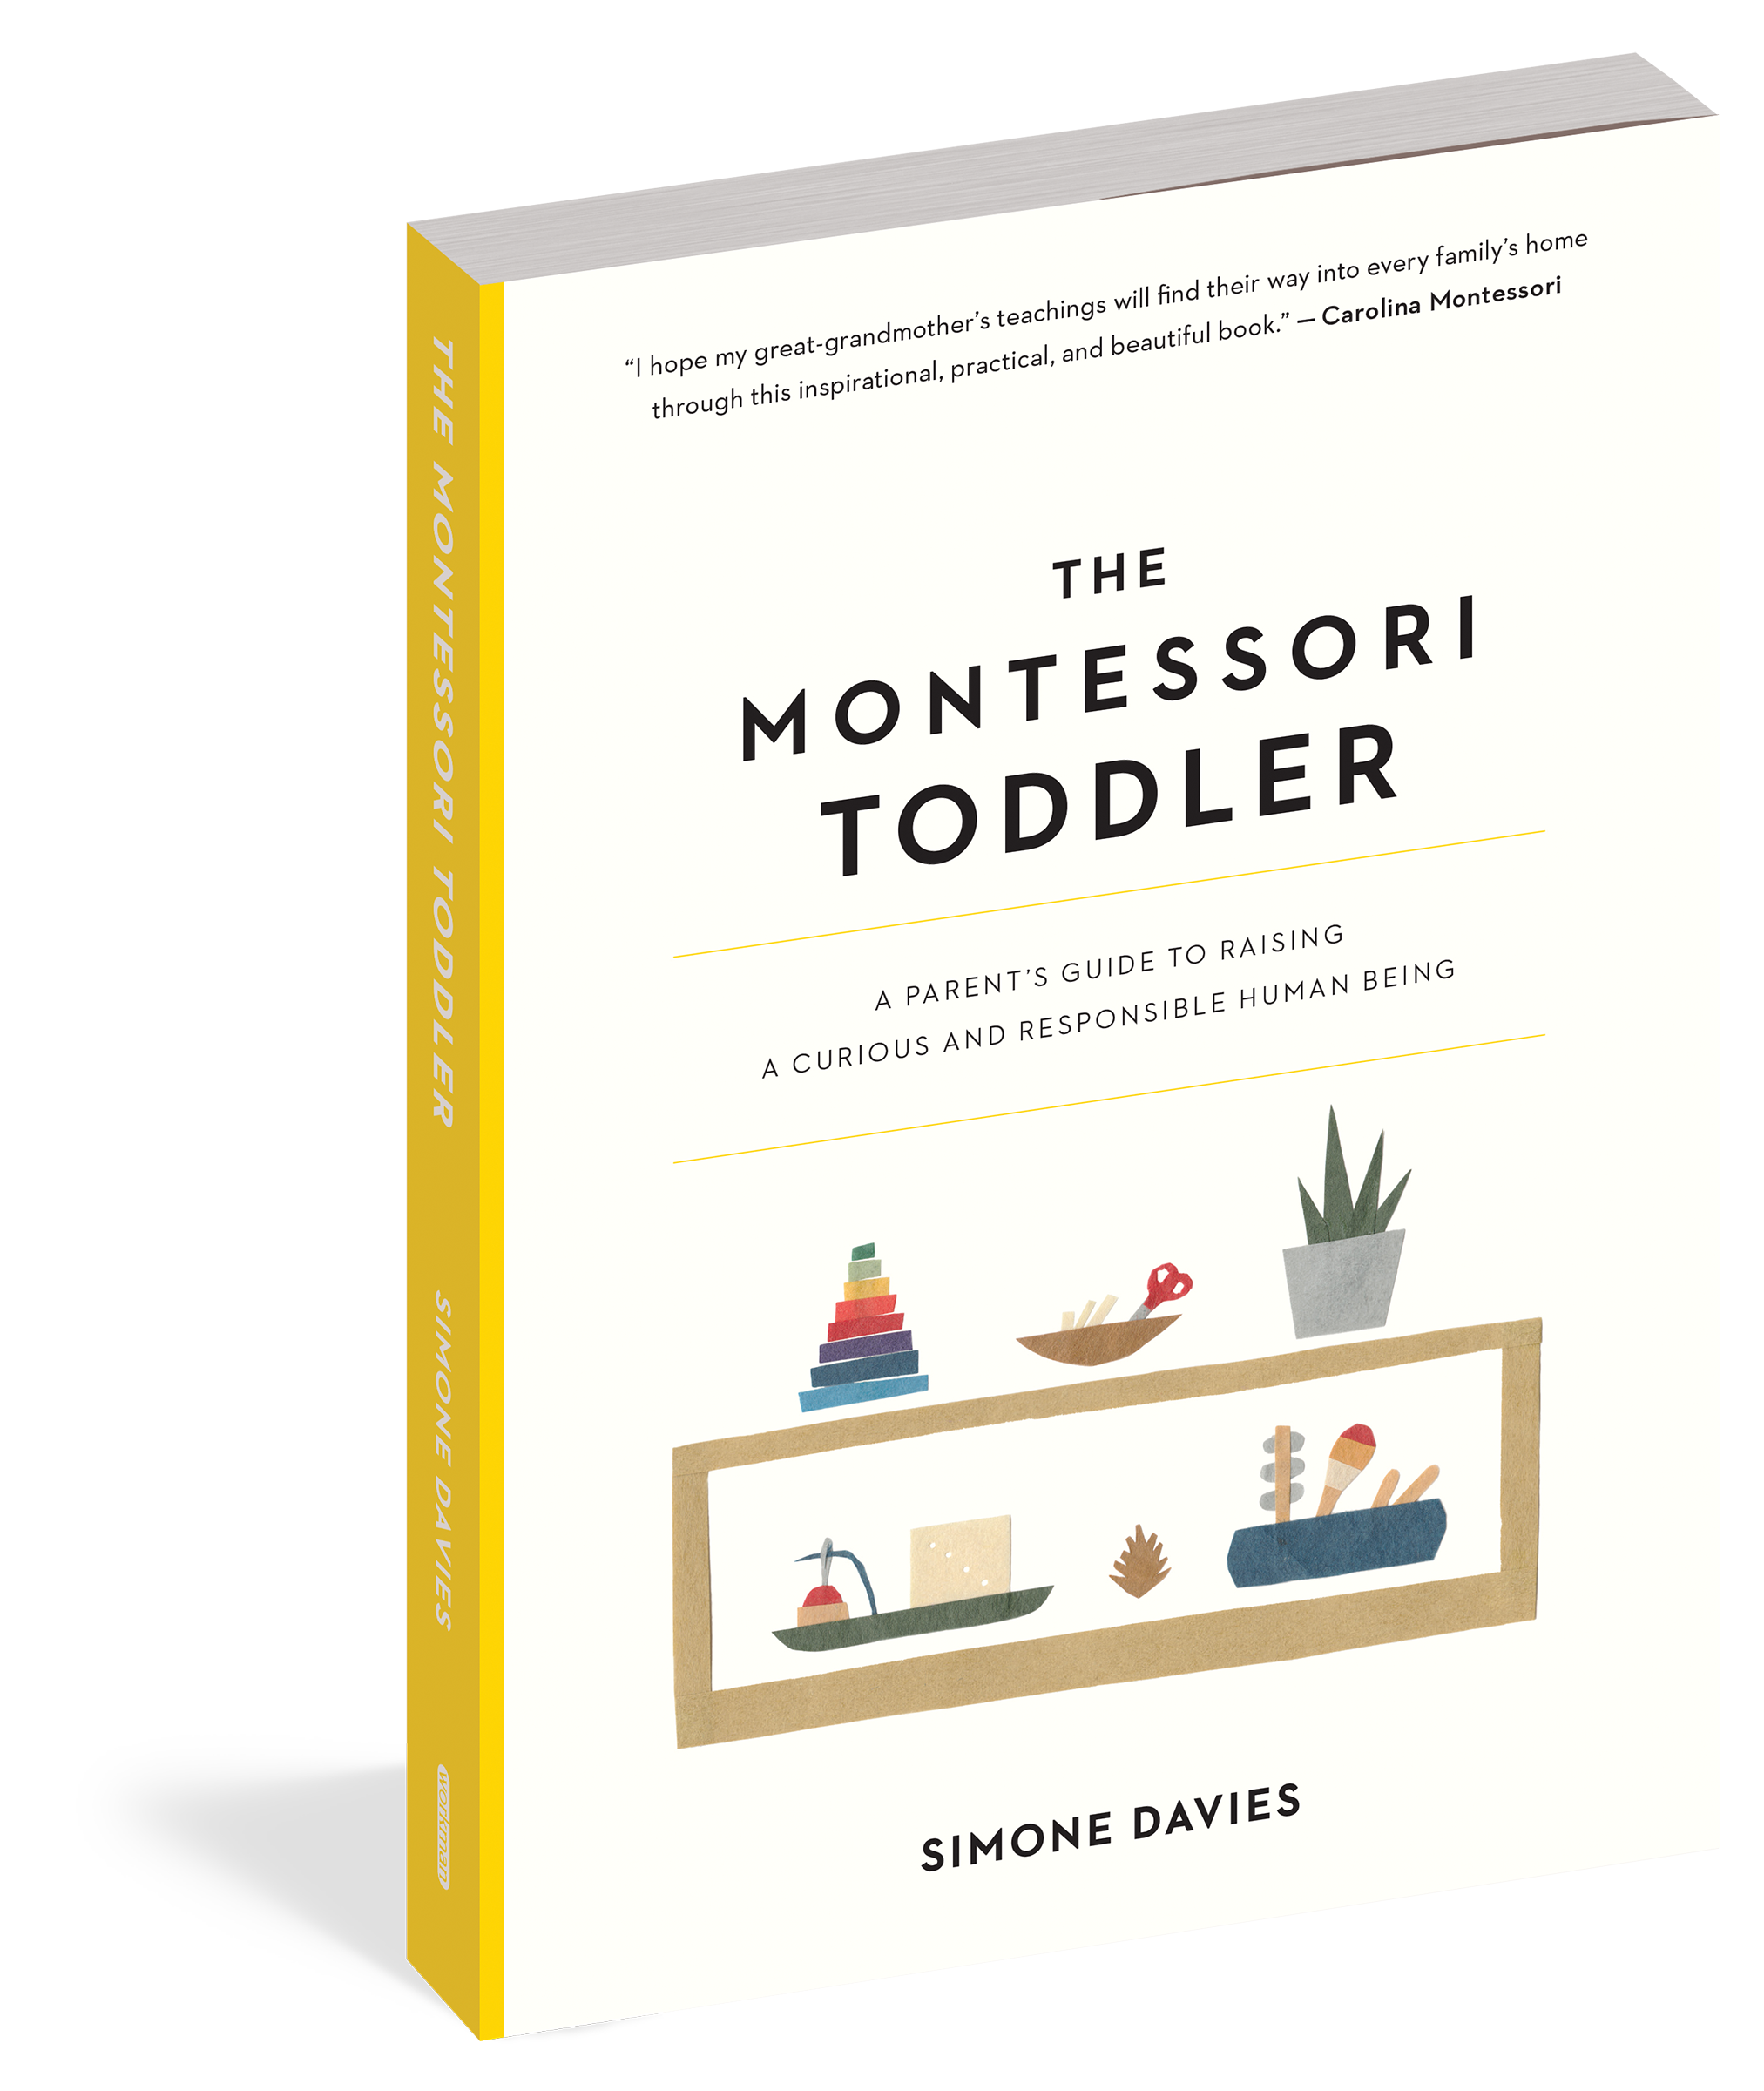 The Montessori Toddler: A Parent's Guide to Raising a Curious and